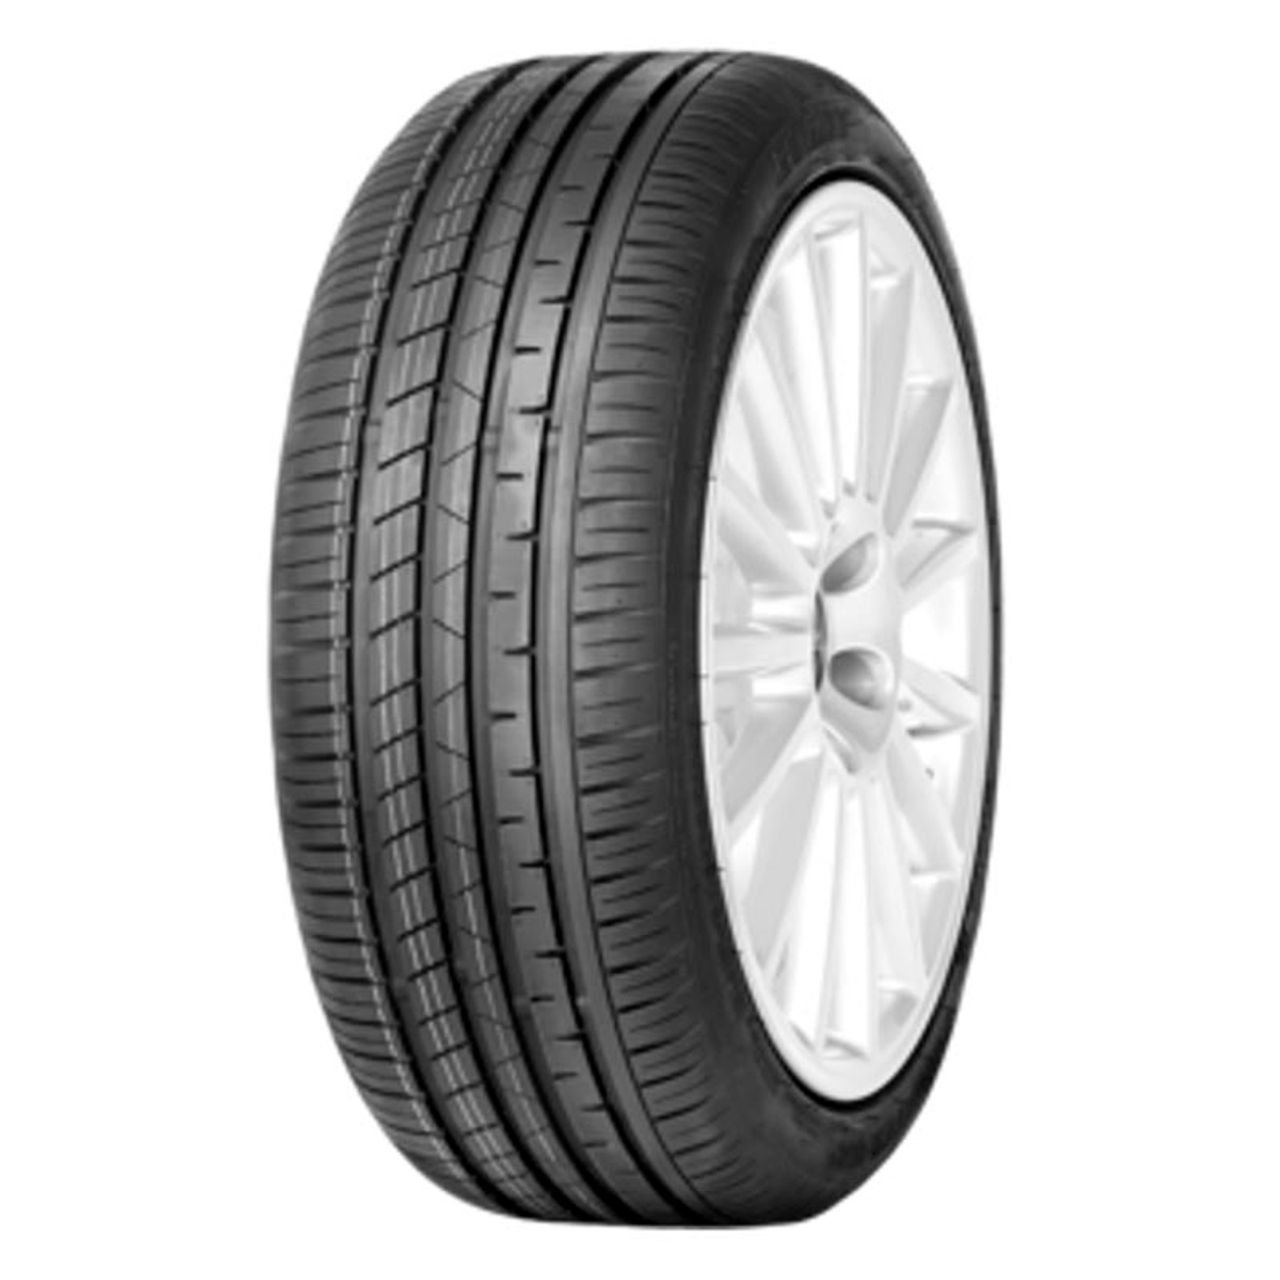 EVENT POTENTEM UHP 235/35R19 91W BSW XL